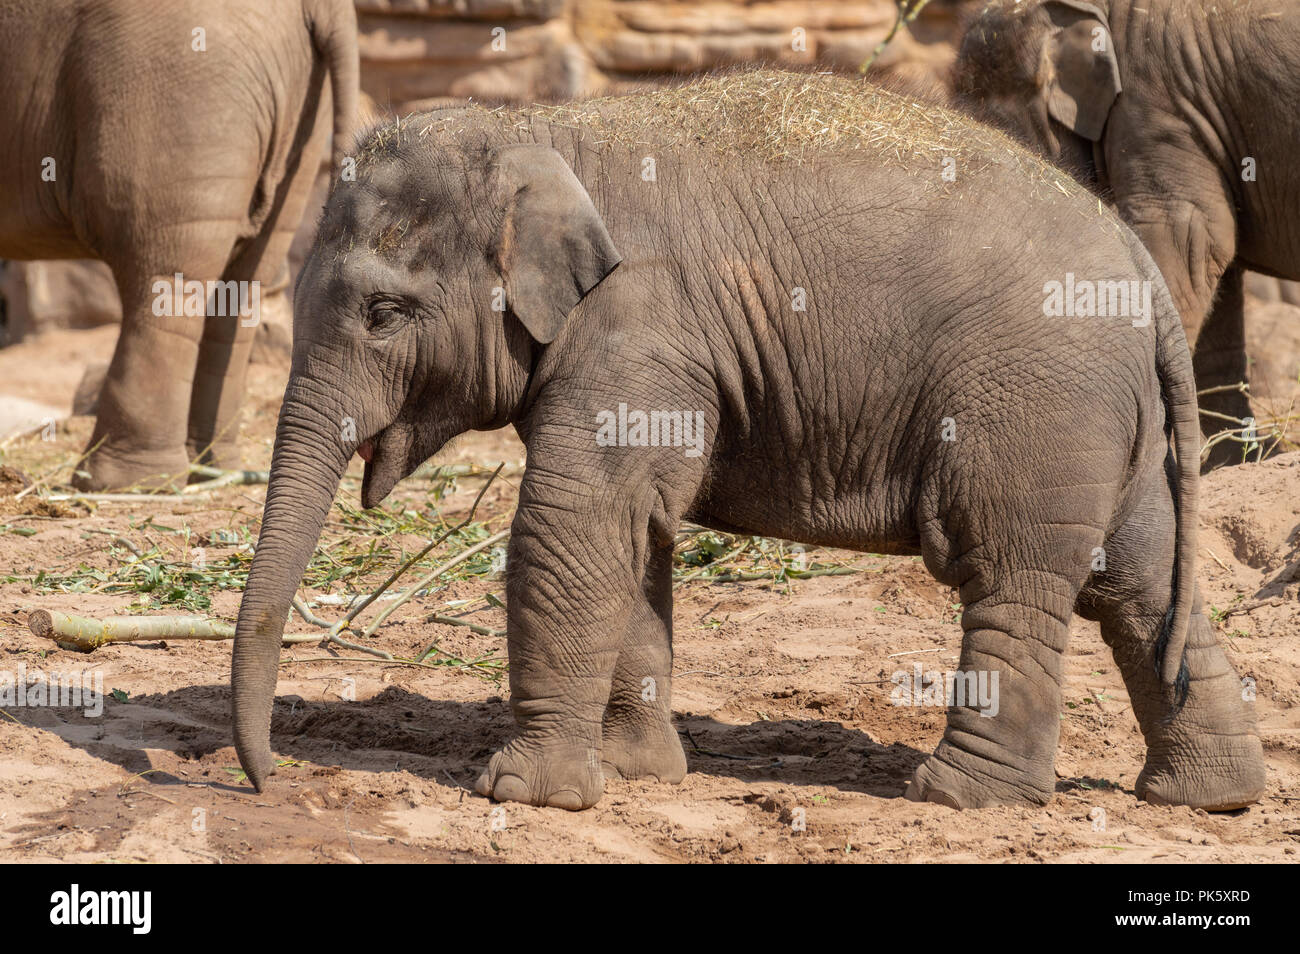 A captive baby elephant in profile at a zoo in the UK. Stock Photo